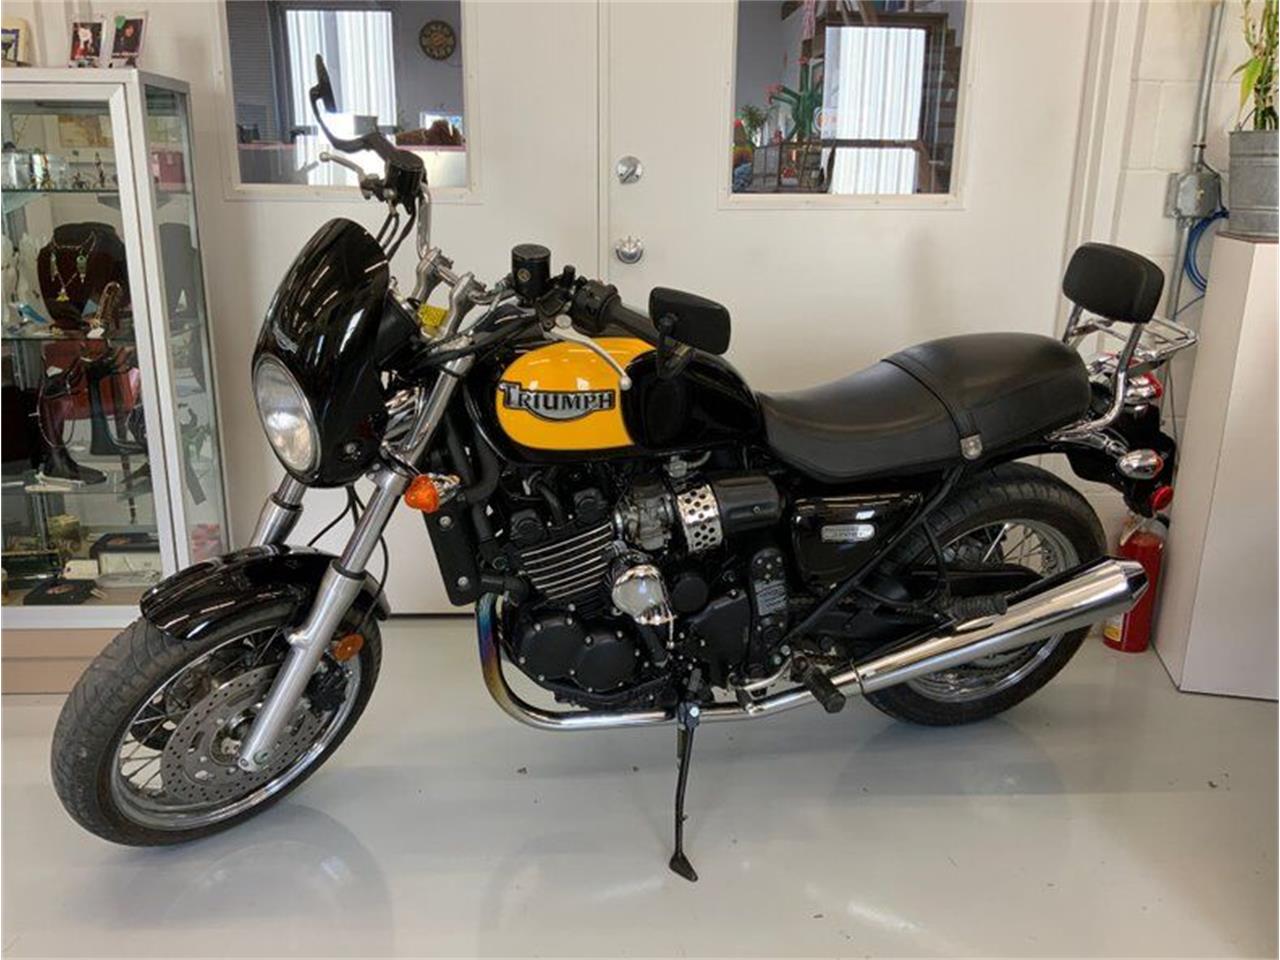 2004 Triumph Motorcycle for sale in Fredericksburg, TX